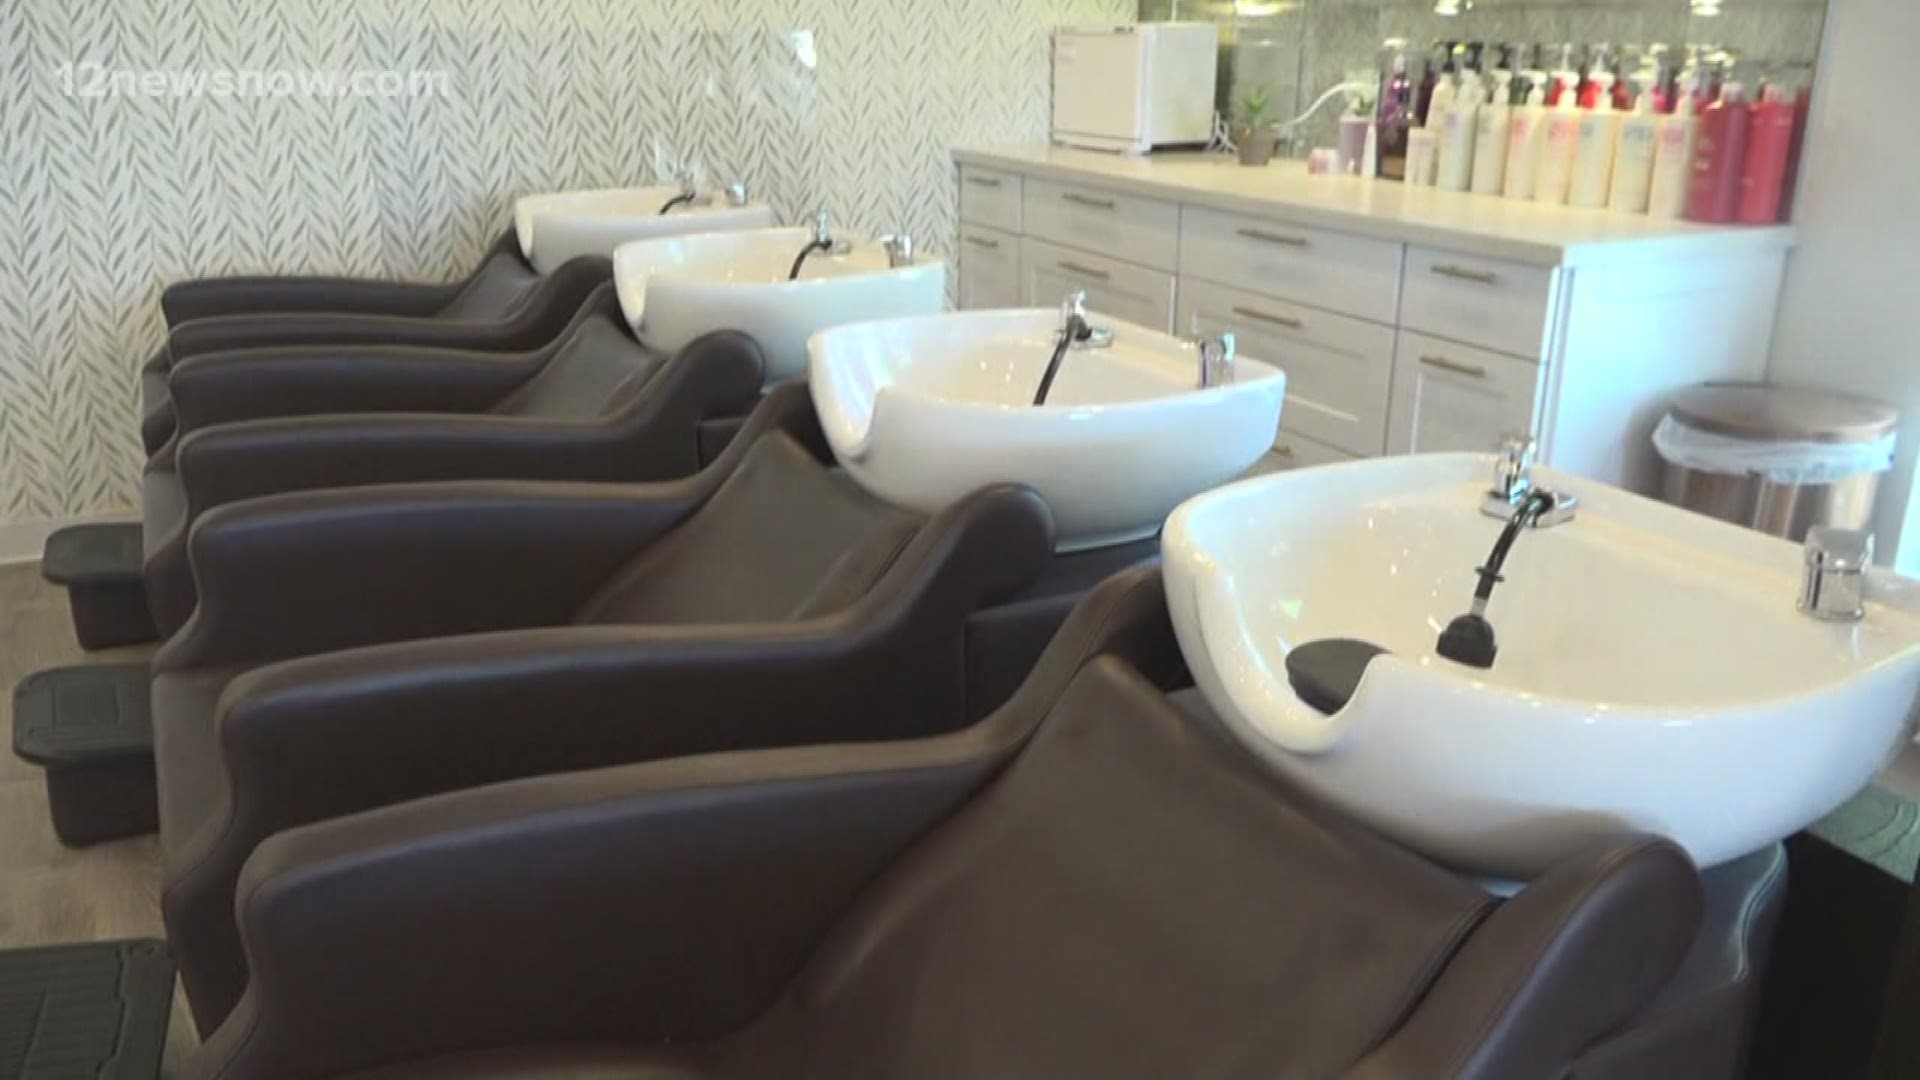 One salon owner says she feels responsible for her employees being without a job